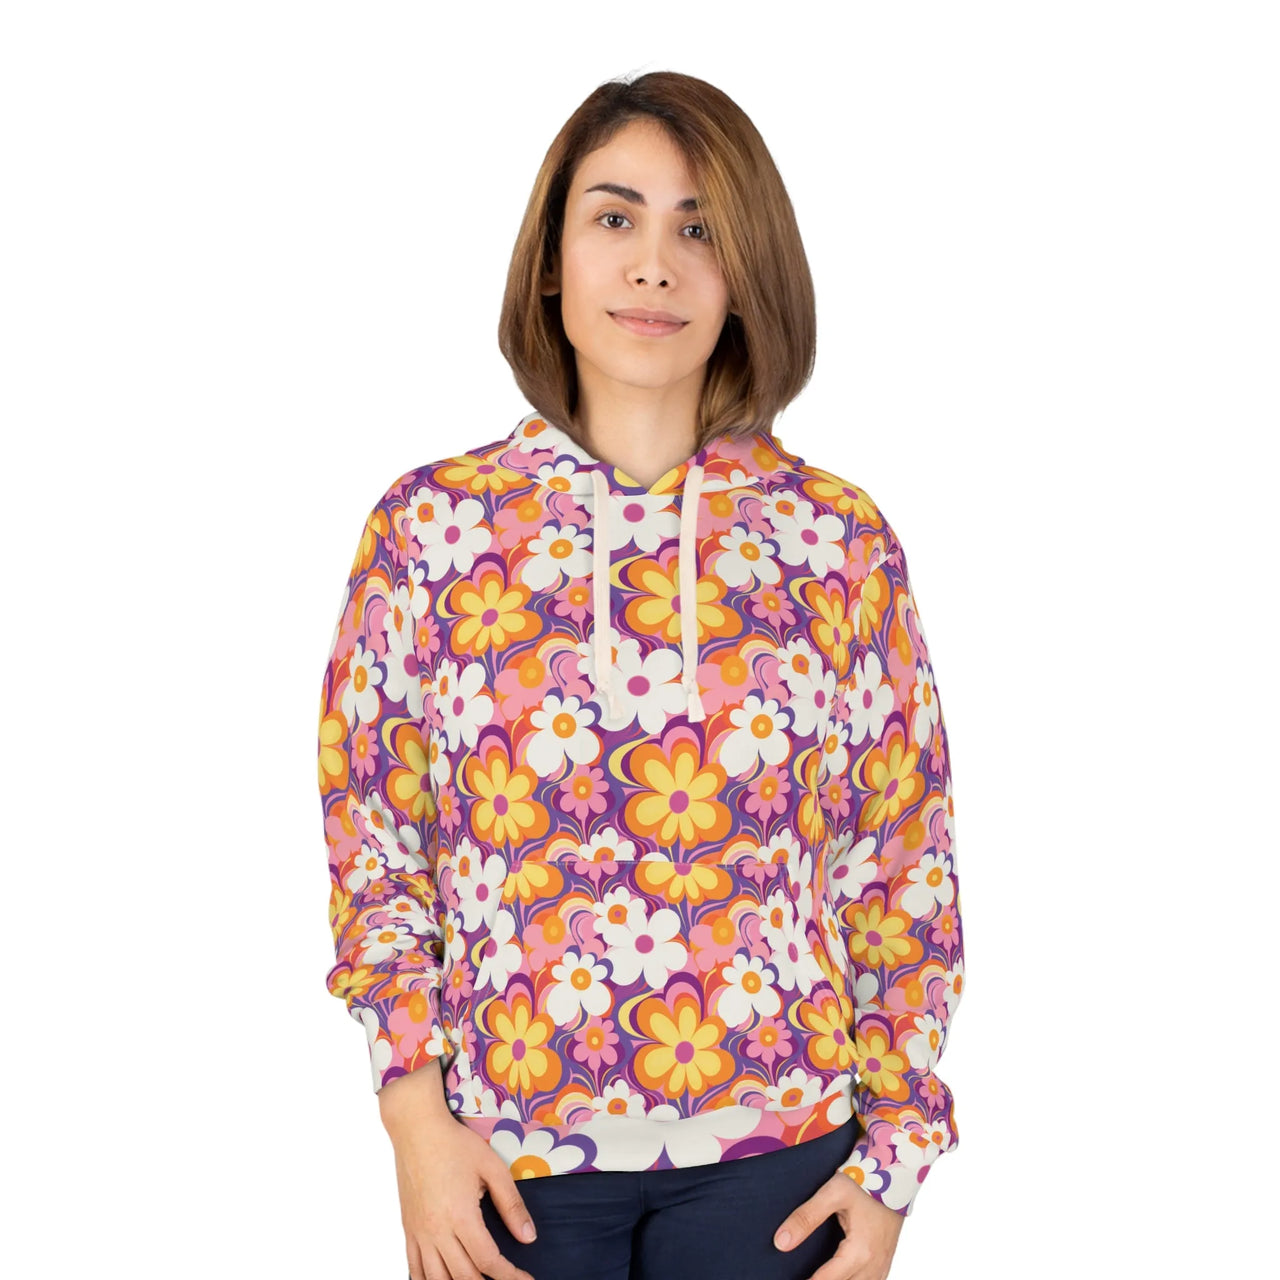 Retro Radiance: Luminous Floral Hoodie for Artful Days